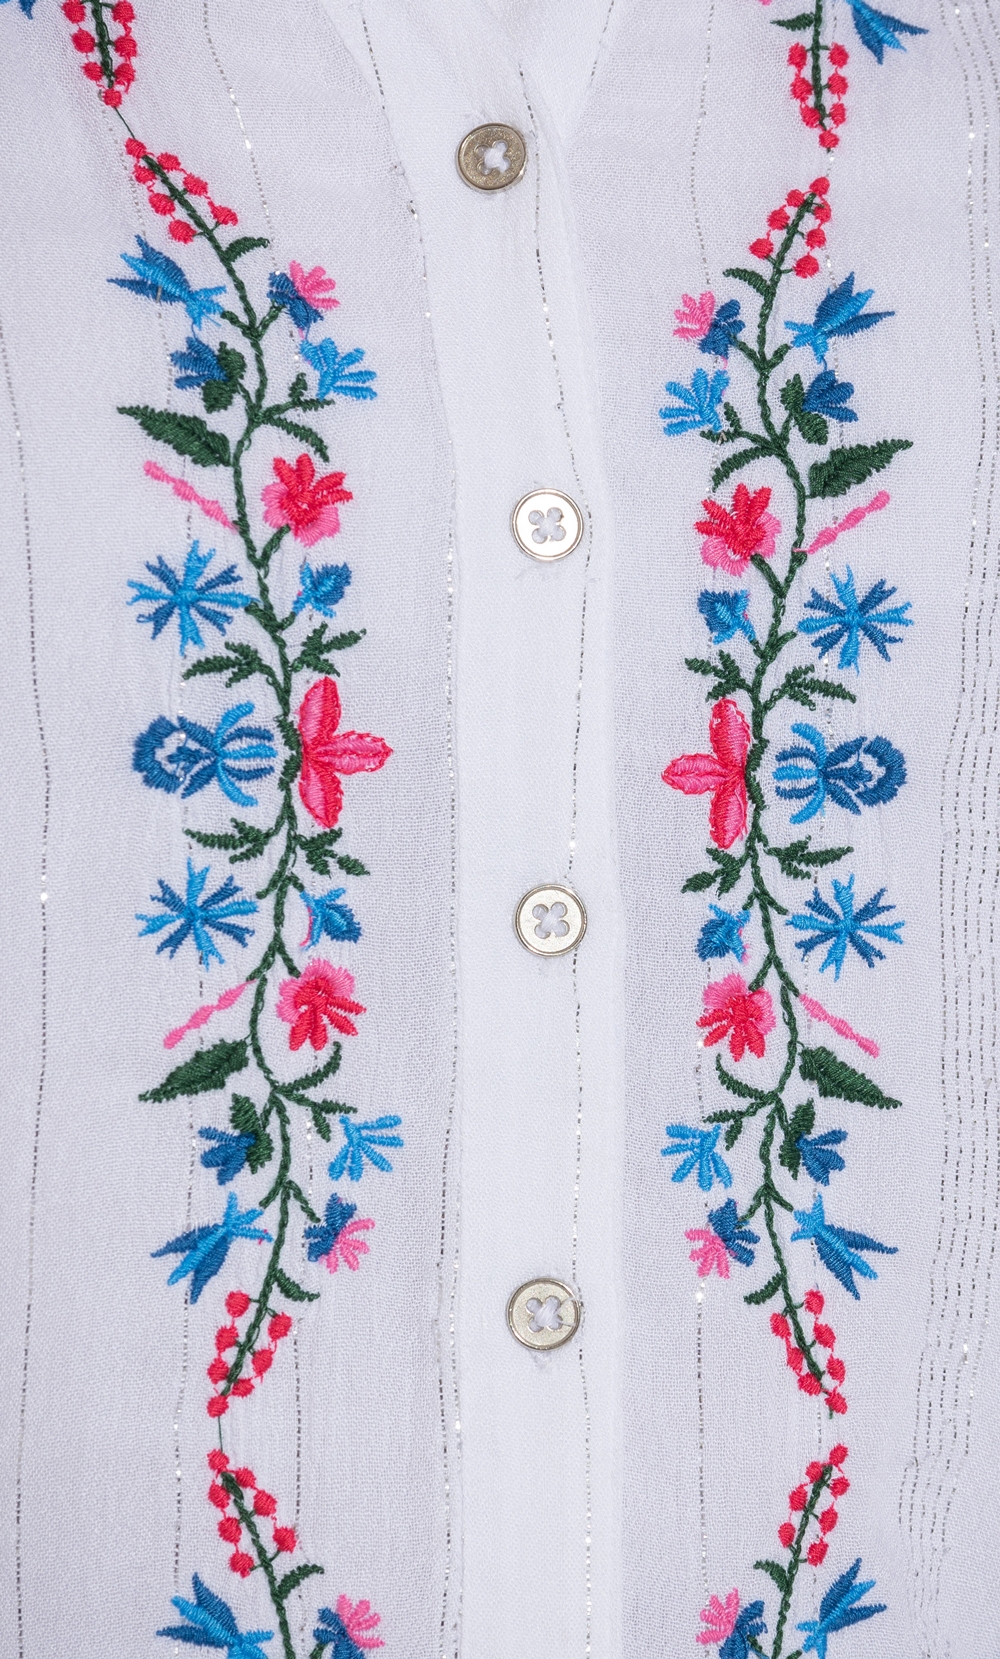 Anna Rose Embroidered Blouse